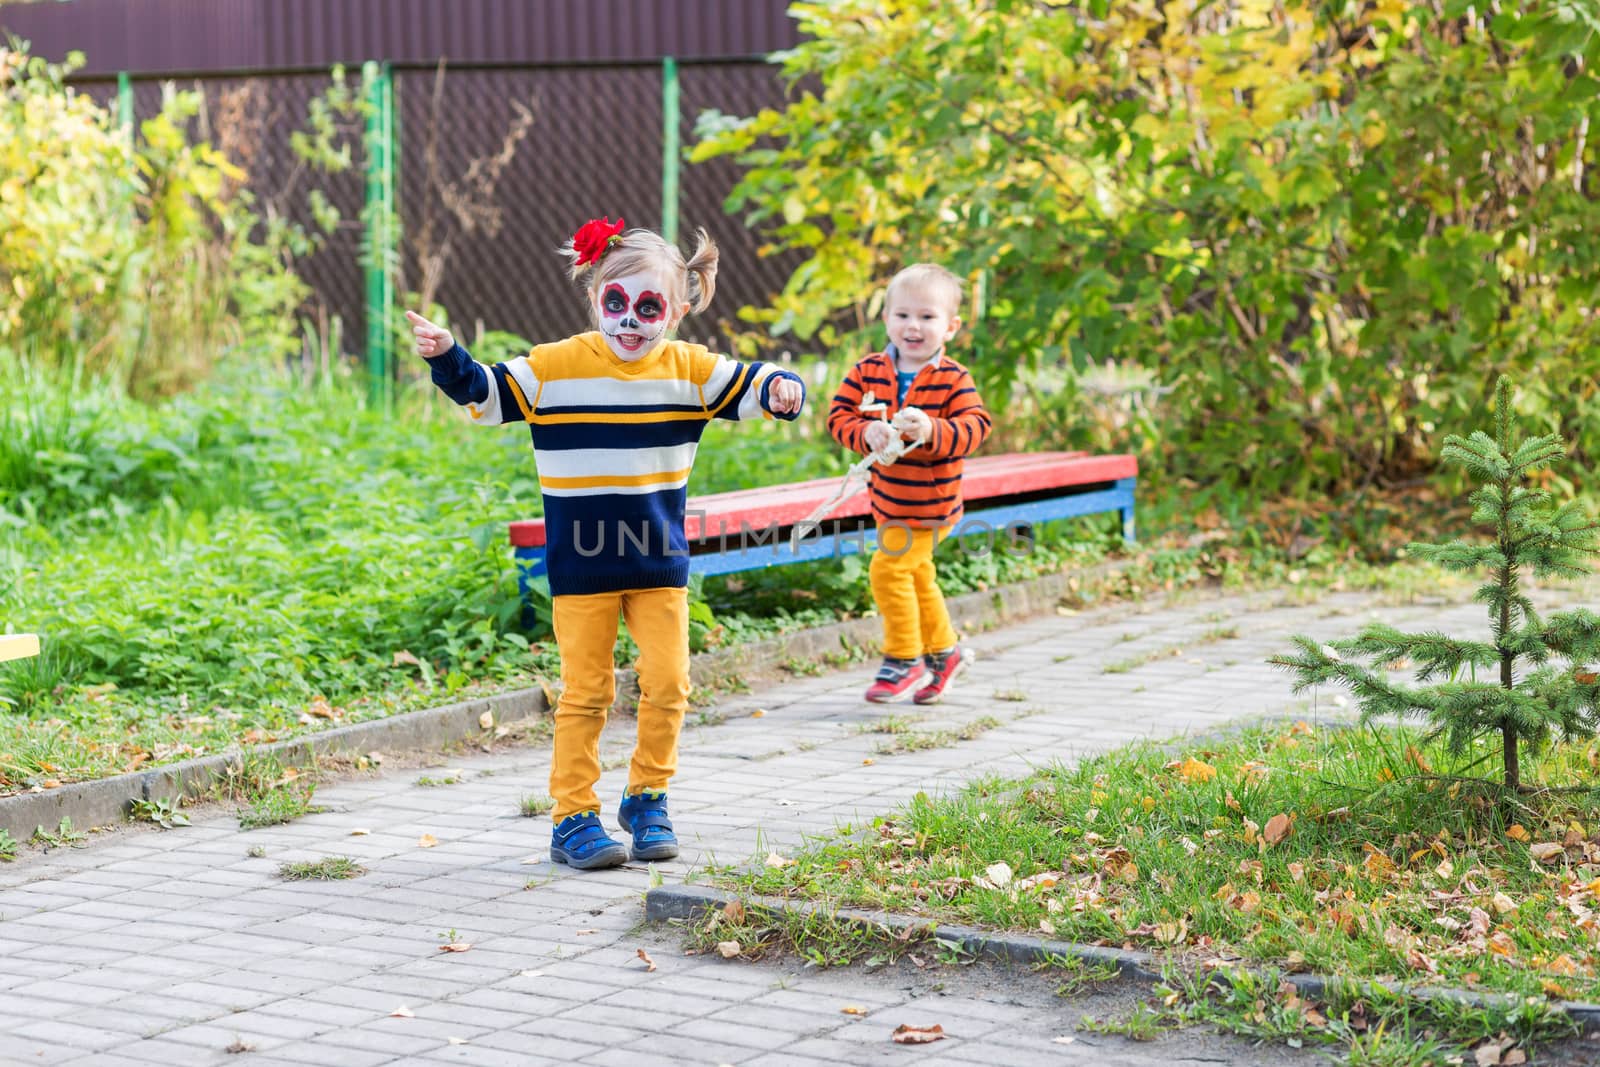 A little girl with Painted Face, running away from brother in the playground by galinasharapova